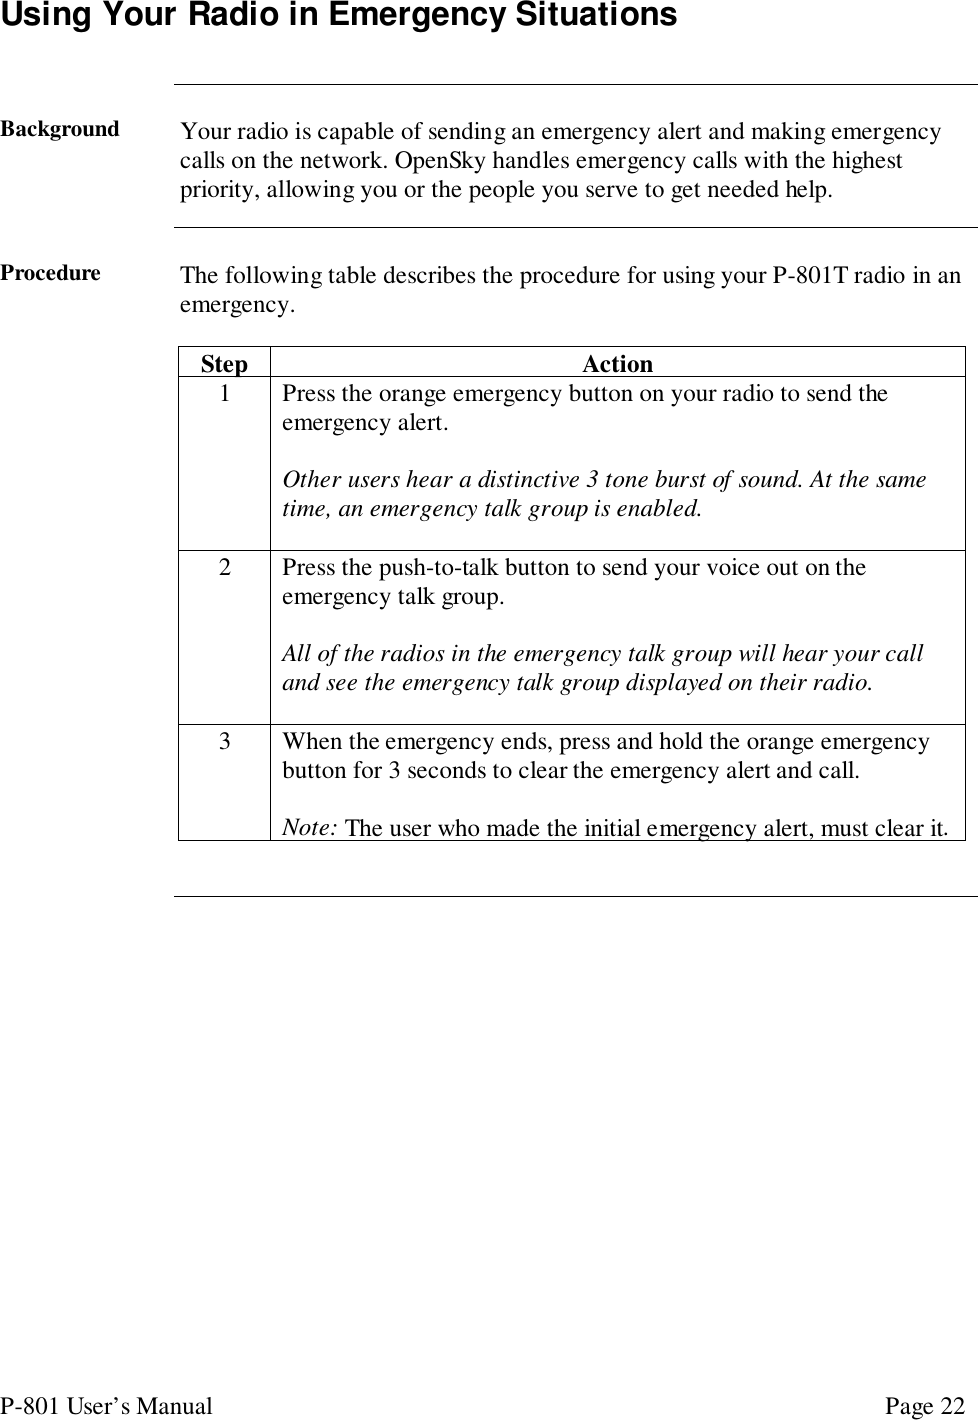 P-801 User’s Manual Page 22Using Your Radio in Emergency SituationsBackground Your radio is capable of sending an emergency alert and making emergencycalls on the network. OpenSky handles emergency calls with the highestpriority, allowing you or the people you serve to get needed help.Procedure The following table describes the procedure for using your P-801T radio in anemergency.Step Action1 Press the orange emergency button on your radio to send theemergency alert.Other users hear a distinctive 3 tone burst of sound. At the sametime, an emergency talk group is enabled.2 Press the push-to-talk button to send your voice out on theemergency talk group.All of the radios in the emergency talk group will hear your calland see the emergency talk group displayed on their radio.3 When the emergency ends, press and hold the orange emergencybutton for 3 seconds to clear the emergency alert and call.Note: The user who made the initial emergency alert, must clear it.